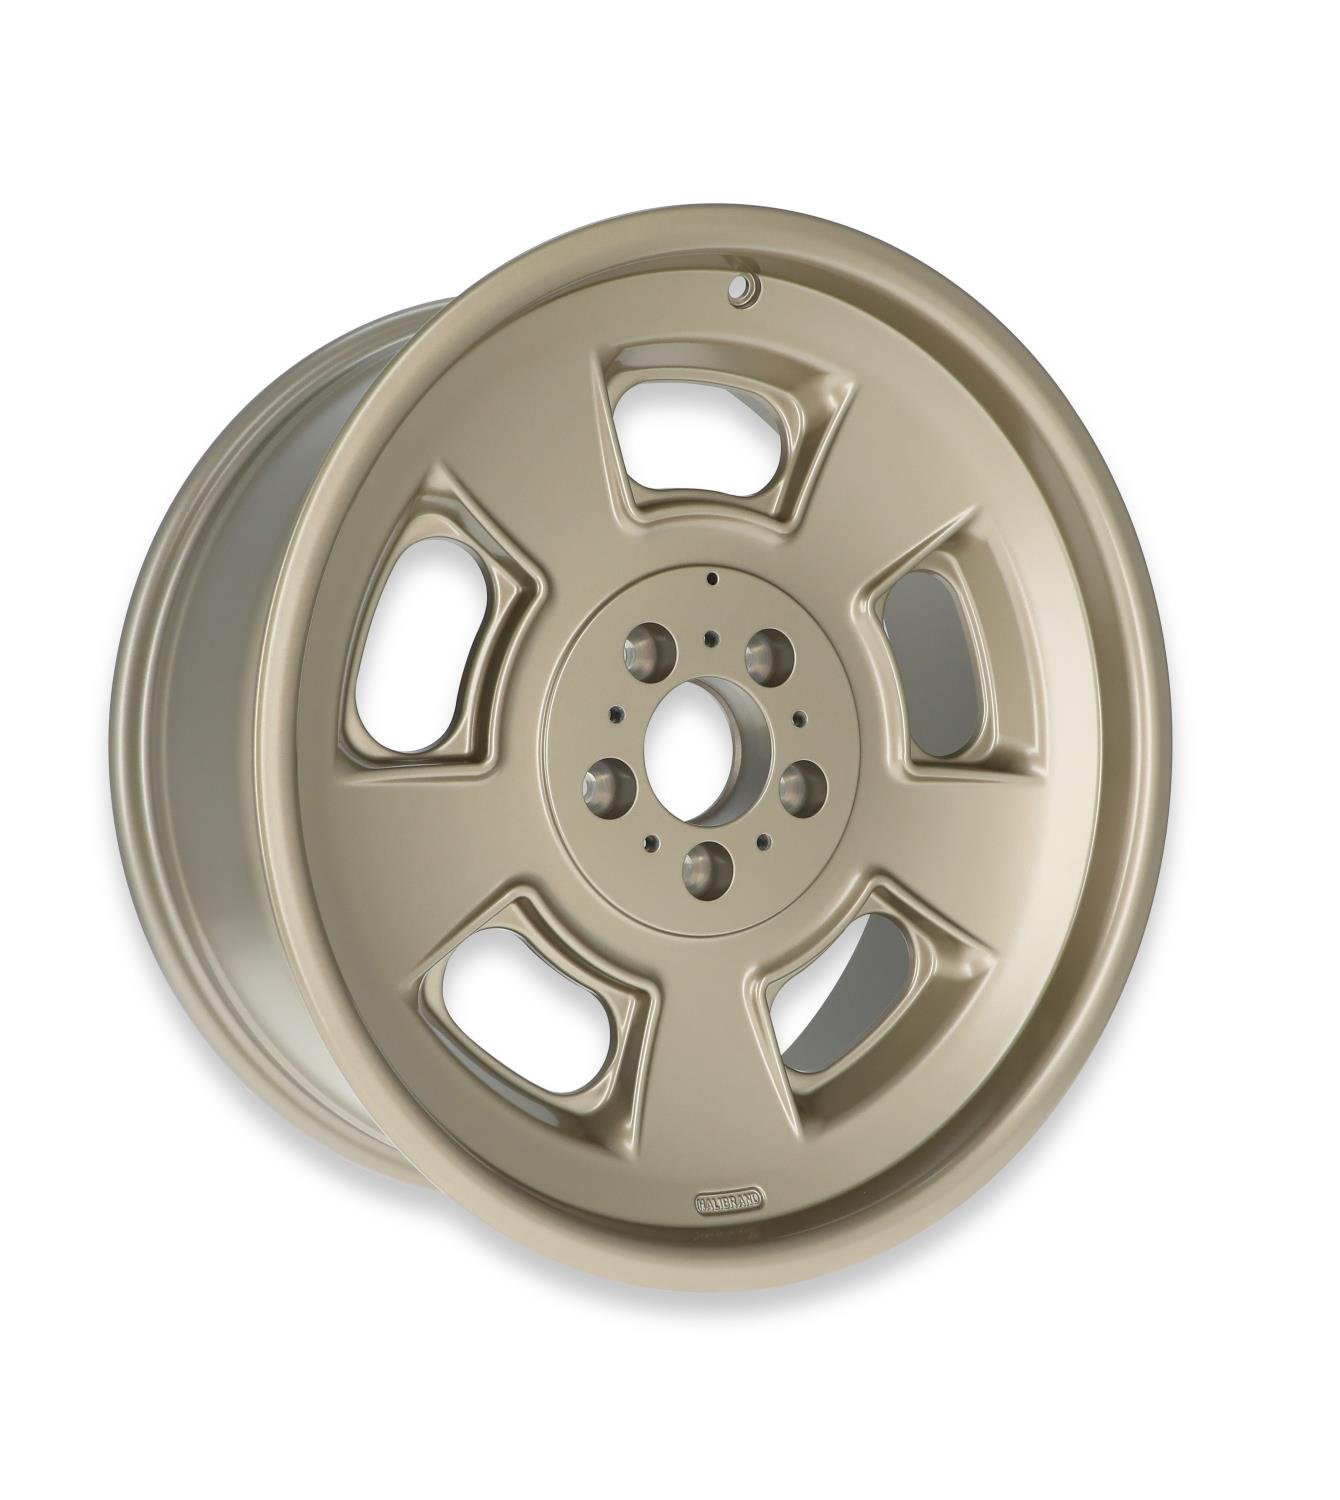 Sprint Front Wheel, Size: 20x8.5", Bolt Pattern: 5x5", Backspace: 5.25" [MAG7 - Semi Gloss Clearcoat]